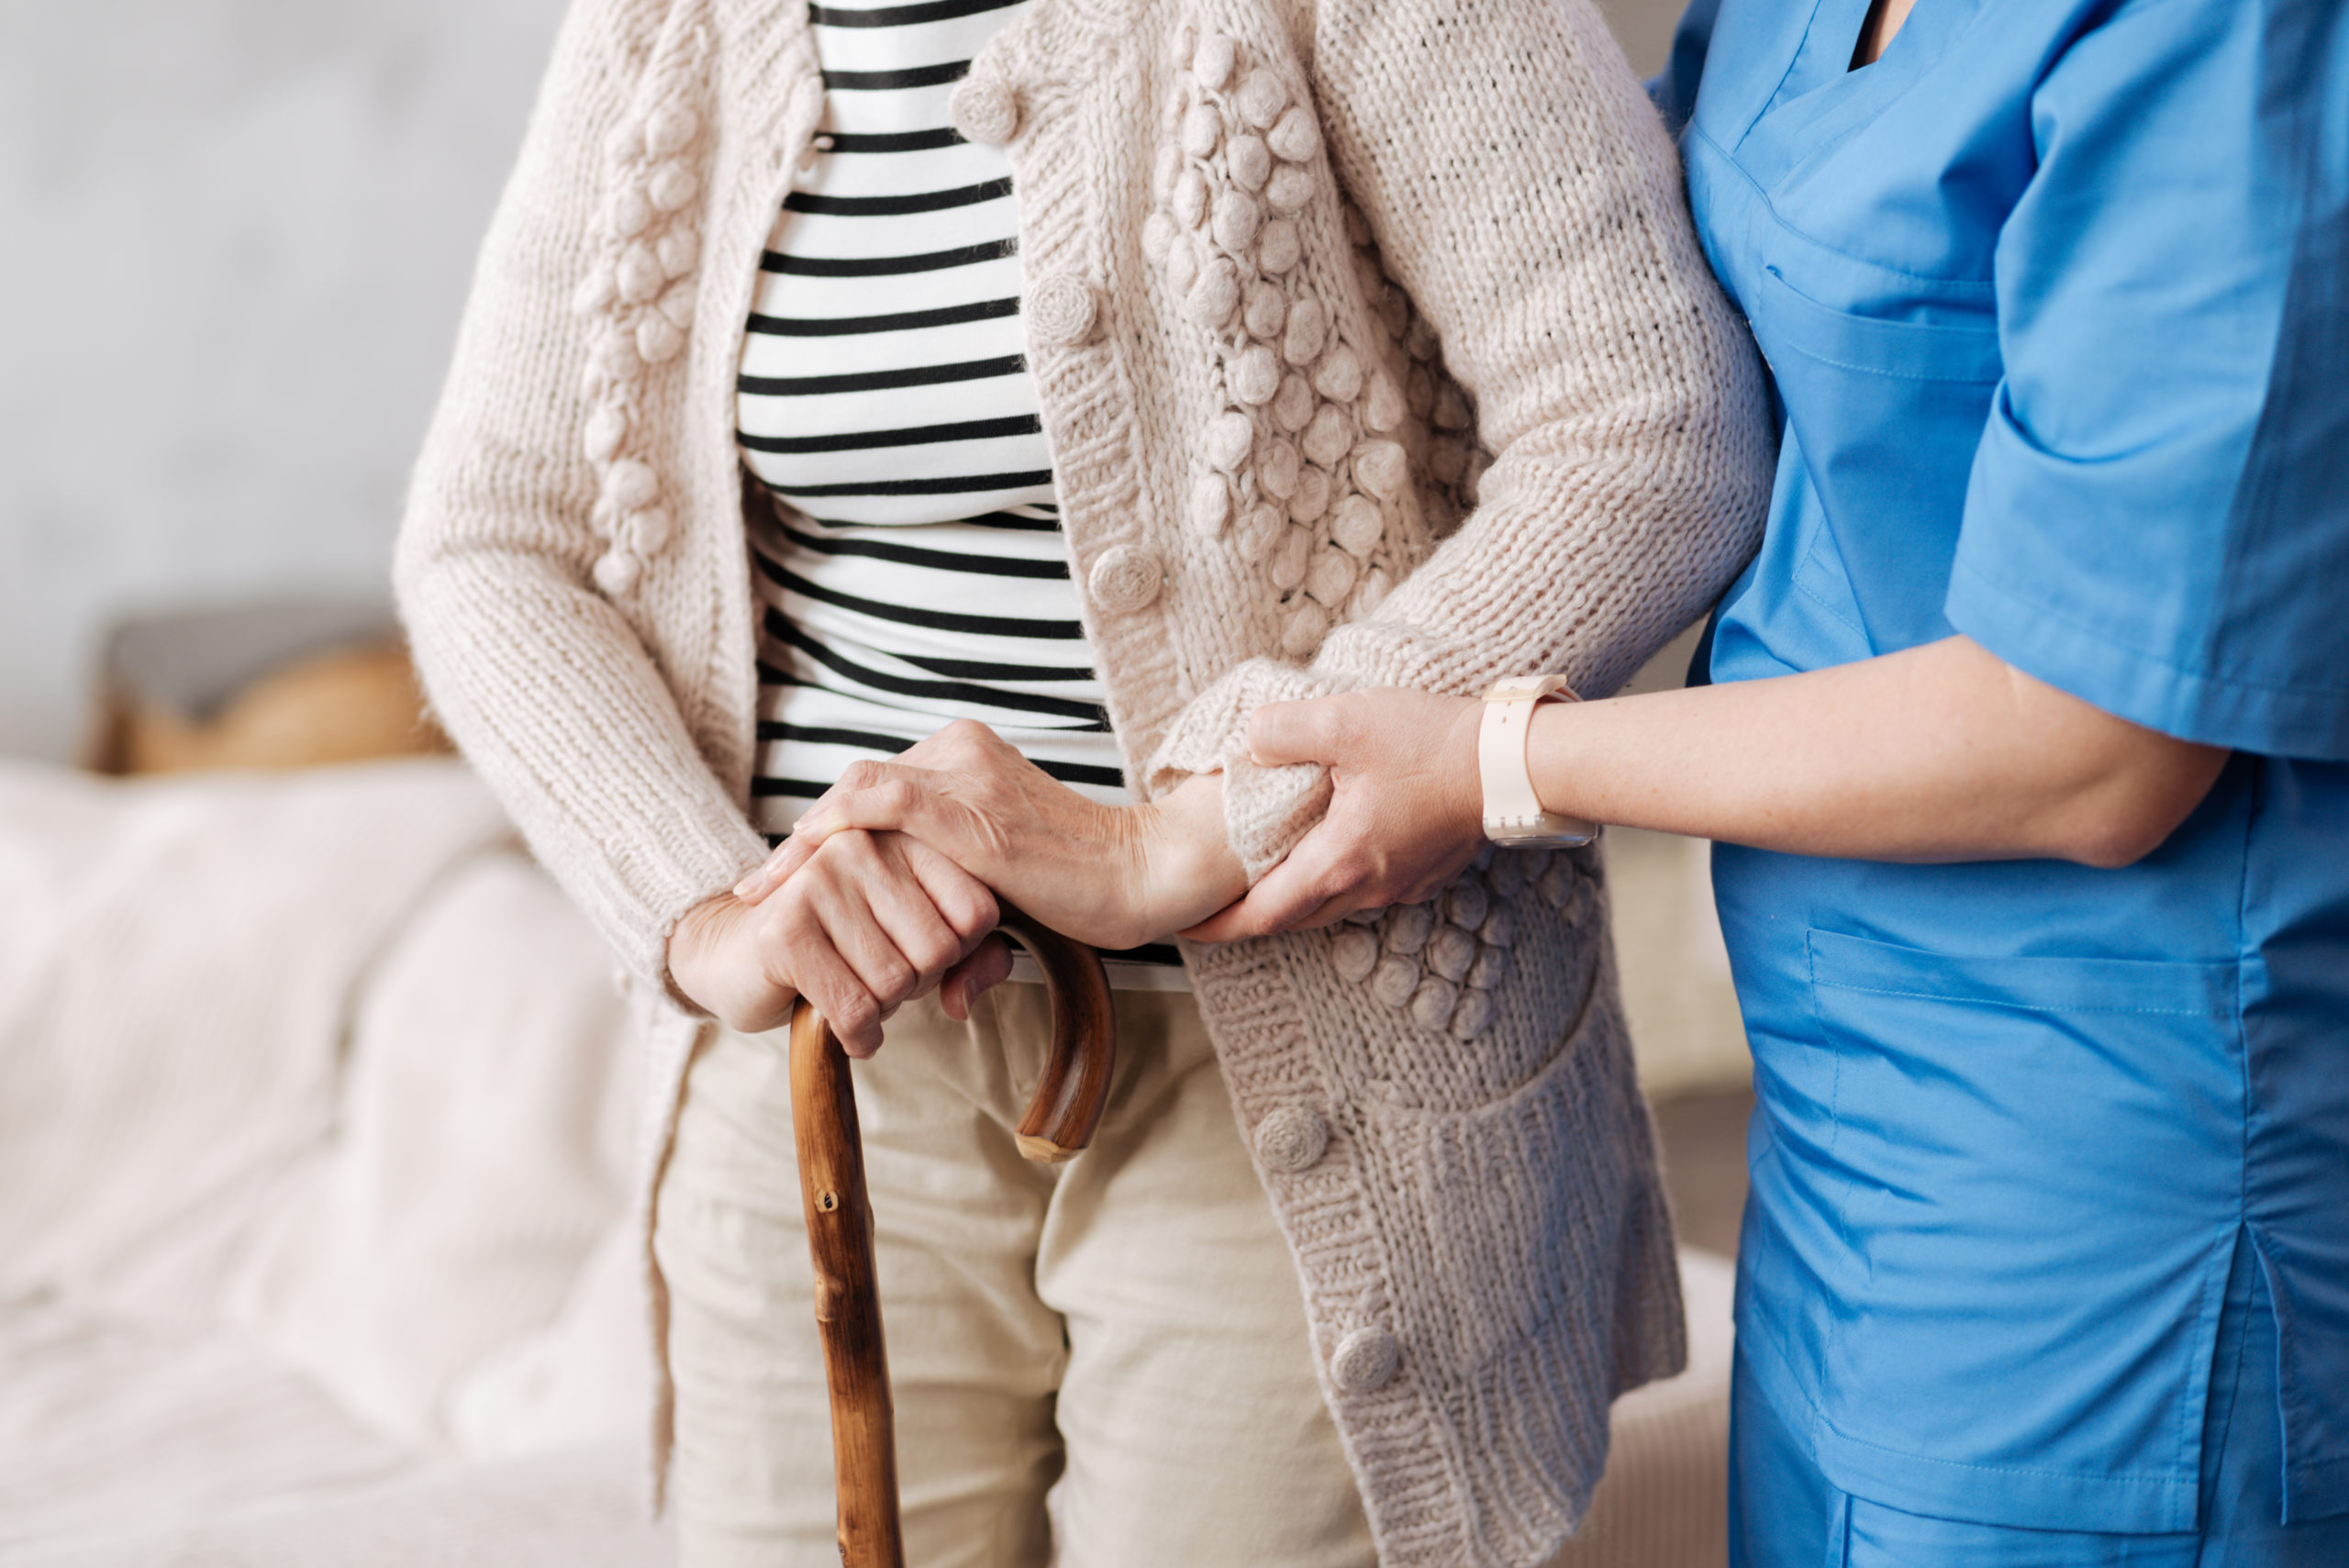 Signs Of Restraint-Related Injuries In Nursing Homes